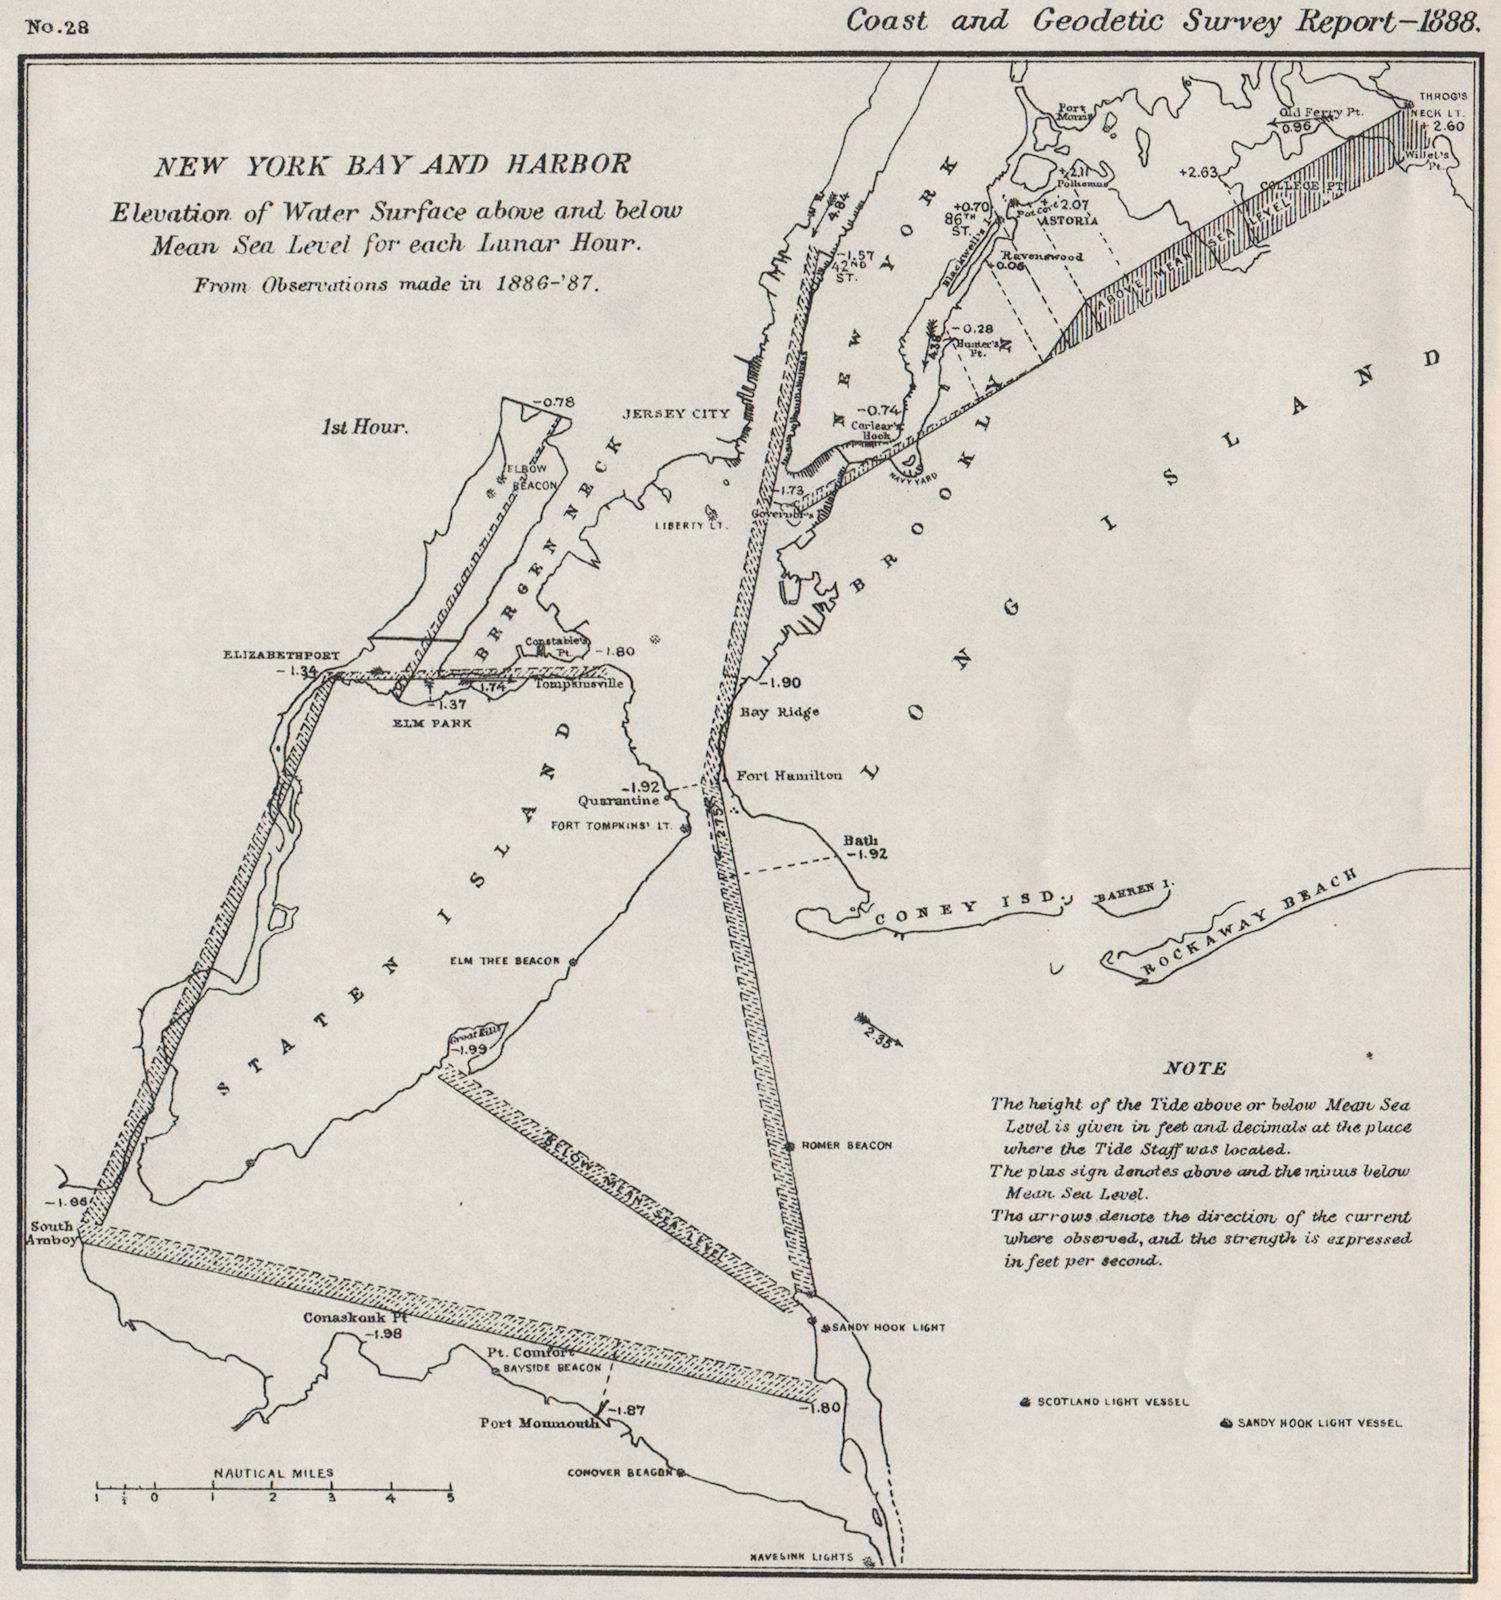 NEW YORK BAY/HARBOR. Water level v mean sea level 1st Lunar Hour. USCGS 1889 map